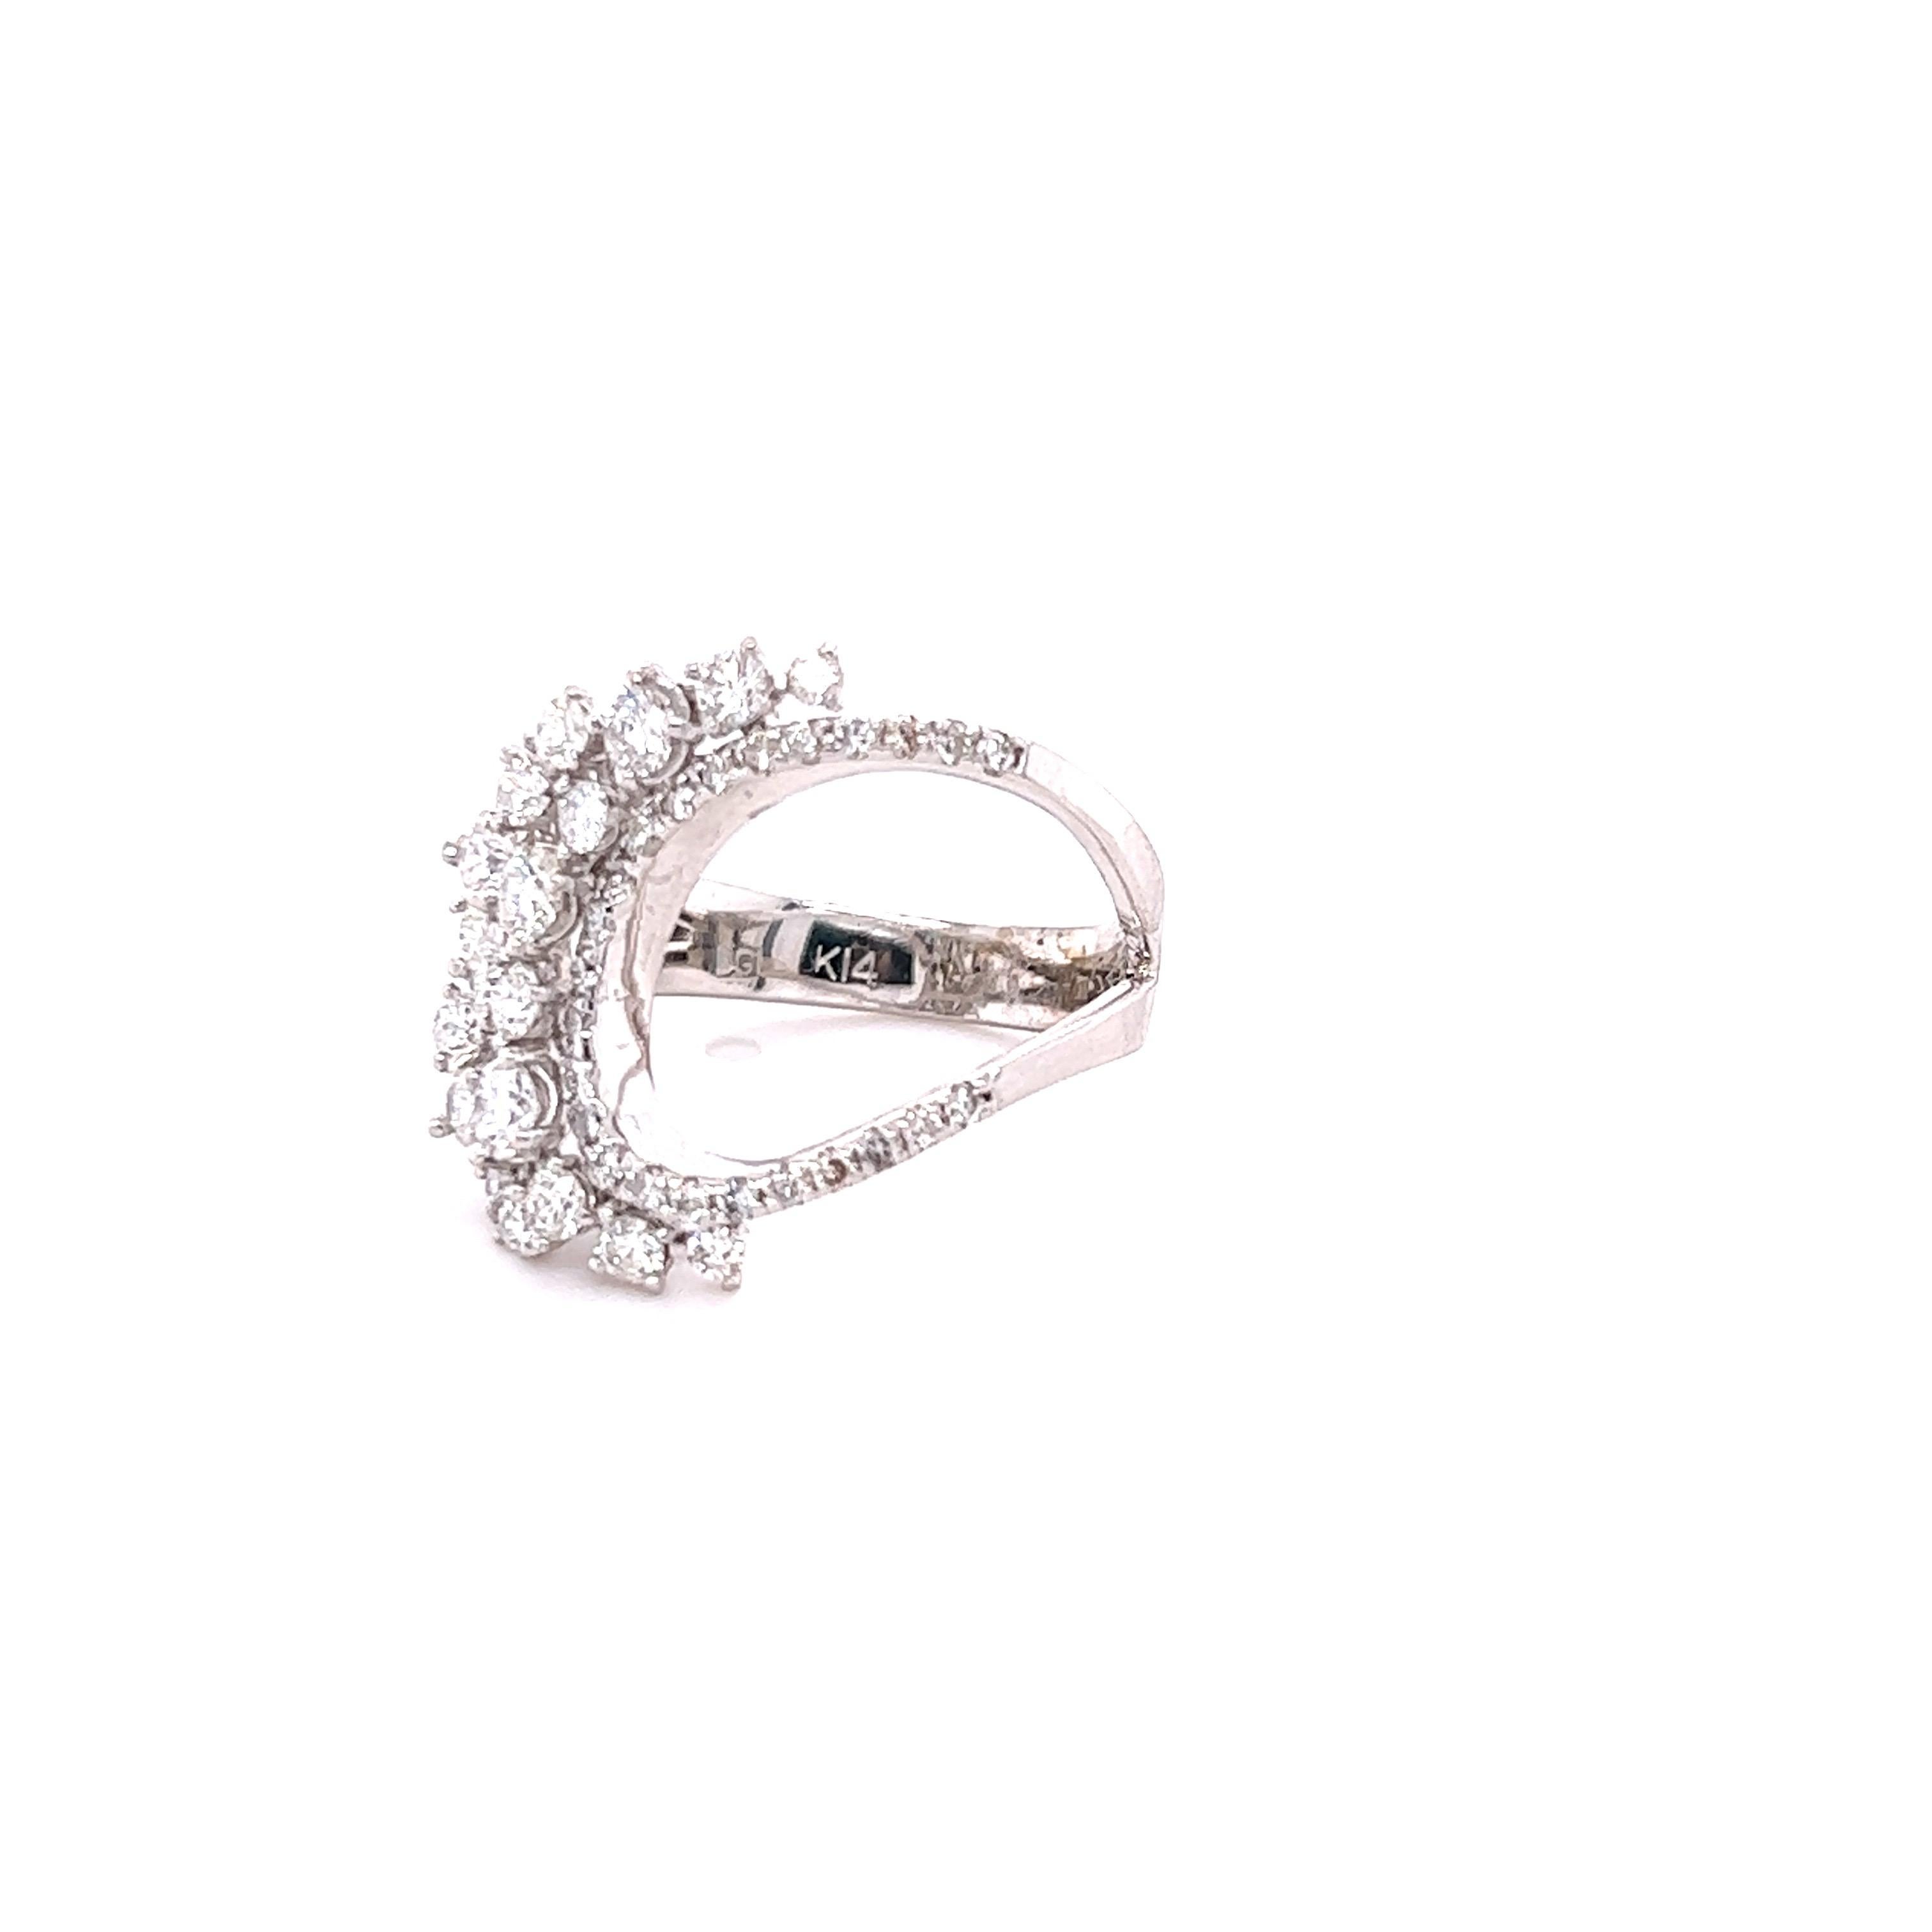 This ring has 43 Round Cut Diamonds that weigh 1.32 Carats and has a clarity and color of SI-F.  
It is crafted in 14 Karat White Gold and has an approximate weight of 5.3 grams. 

The ring is a size 7 and can be re-sized at no additional charge! 